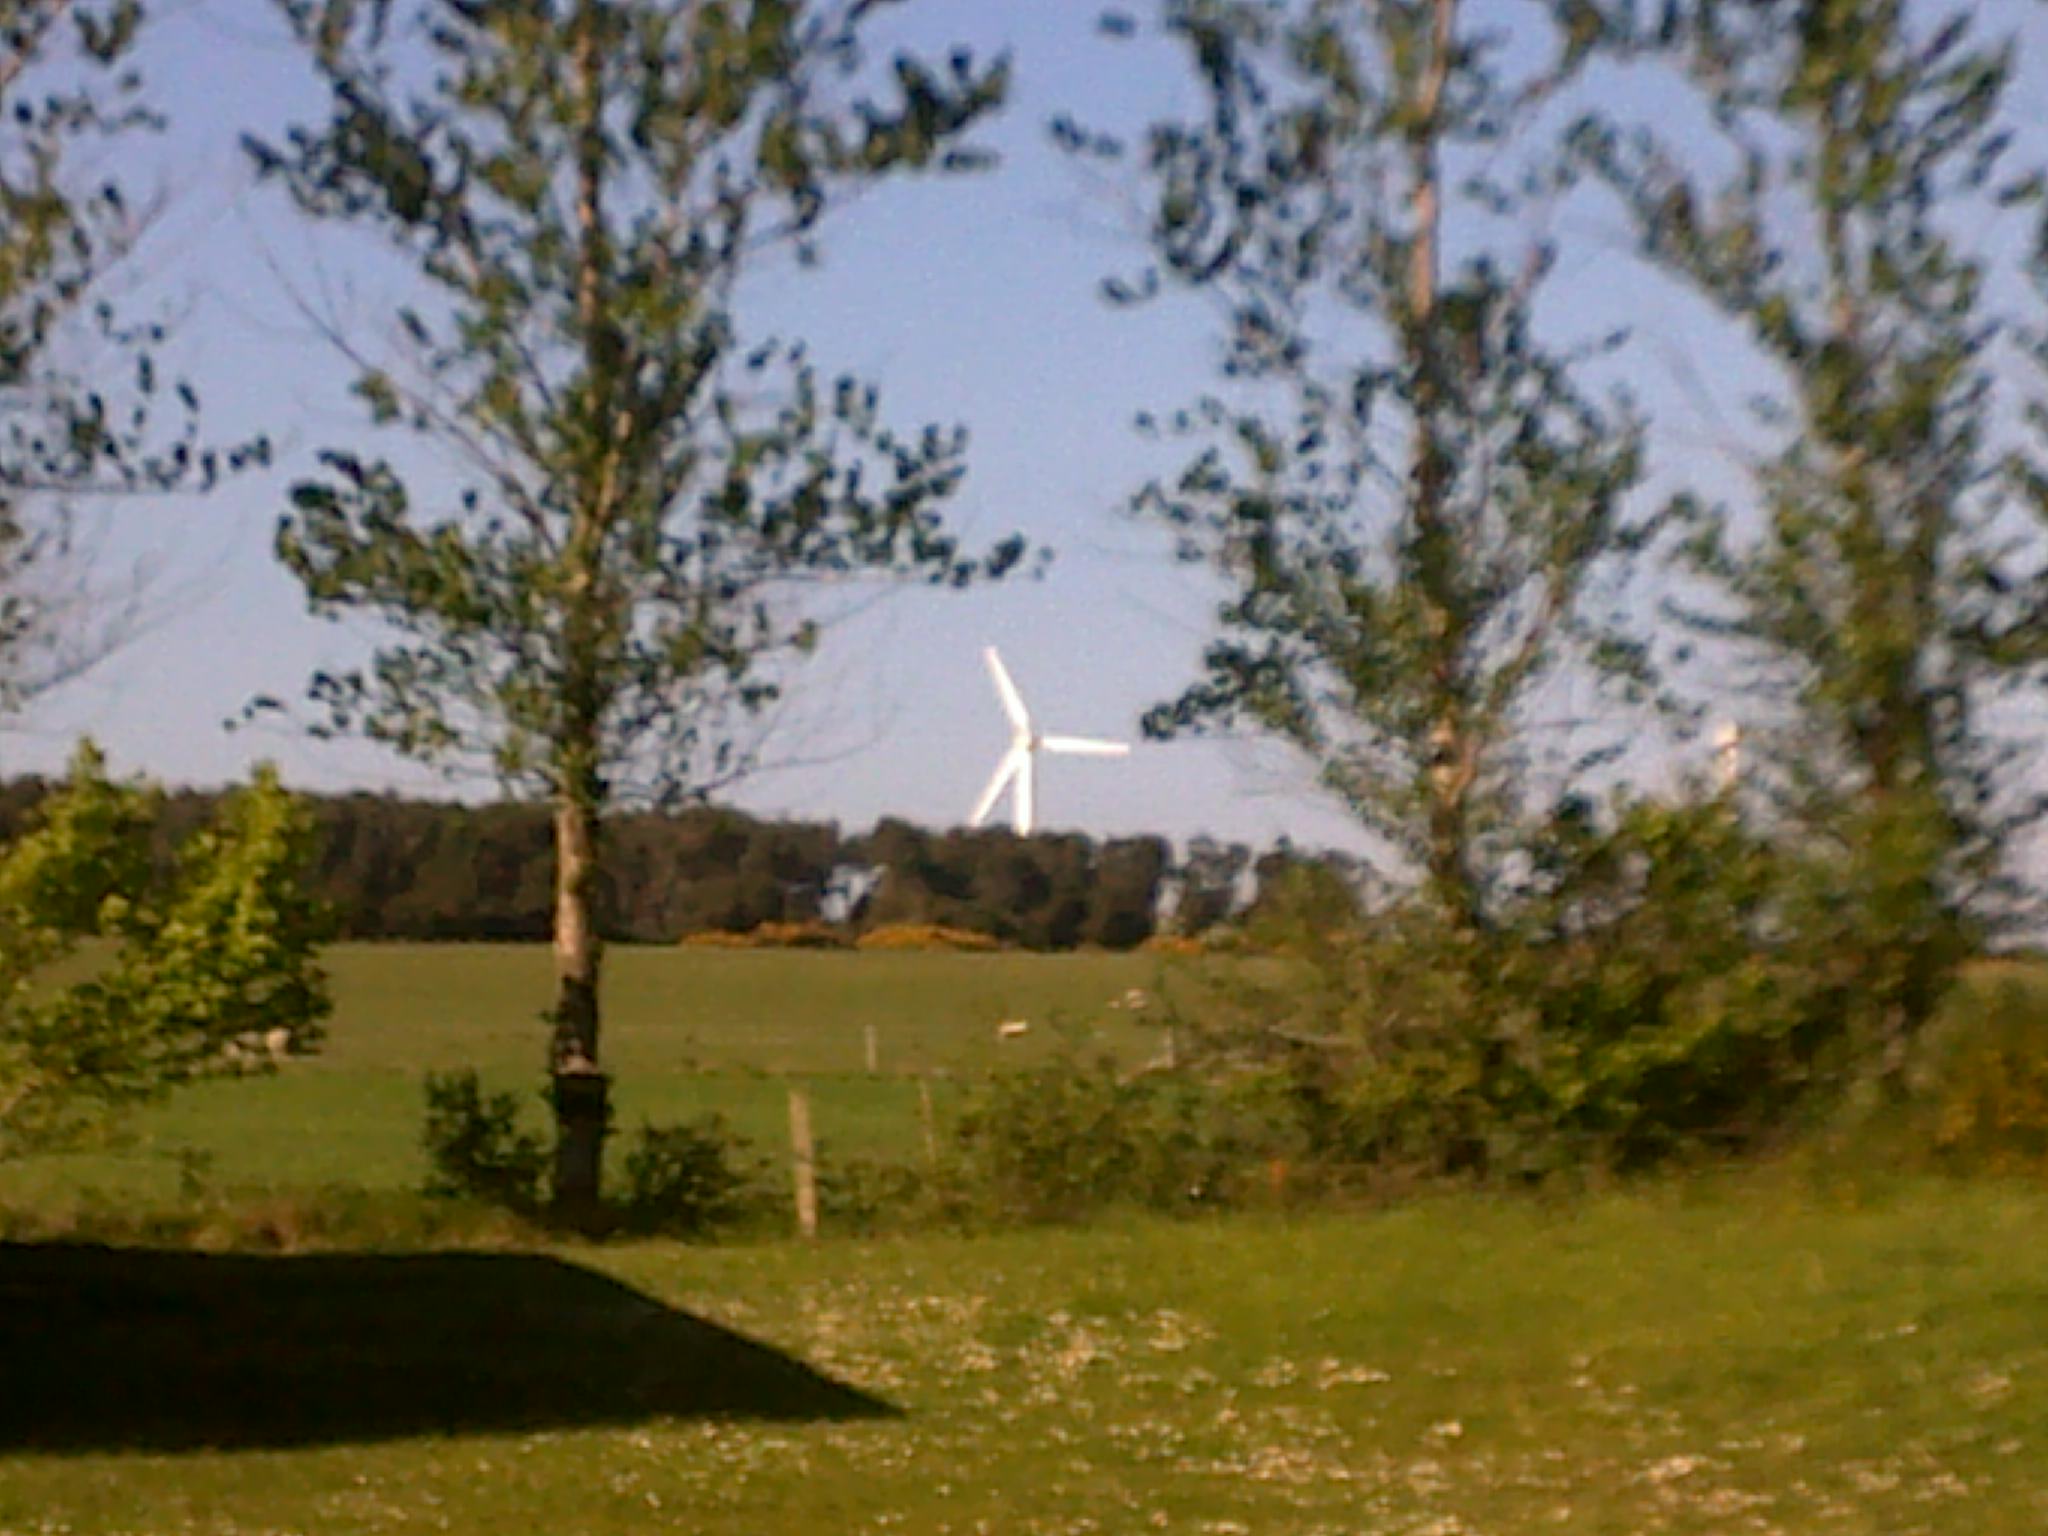 a tree is in the foreground as a wind turbine sits in the background